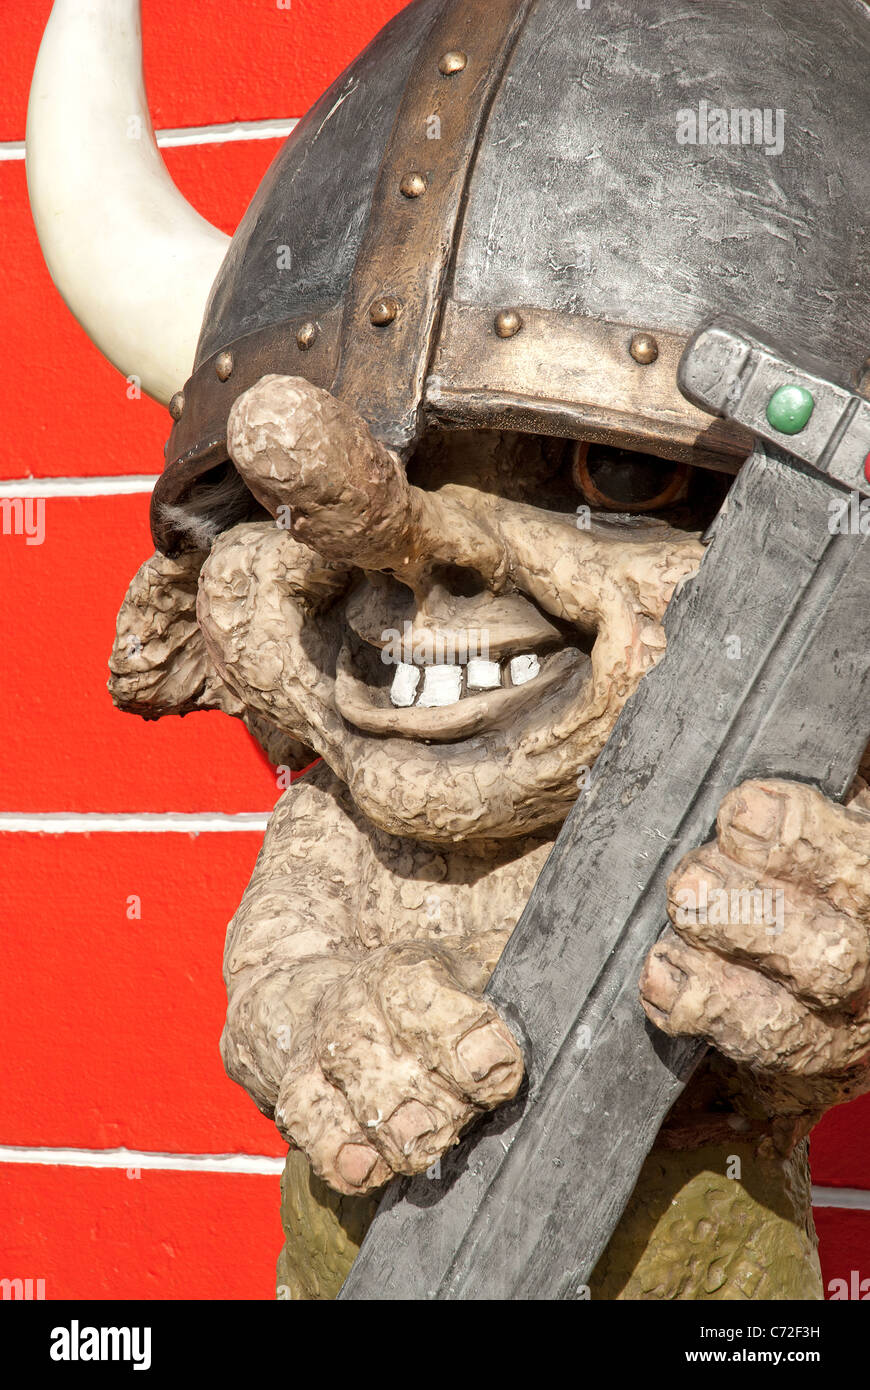 troll mythical viking figure in iceland Stock Photo